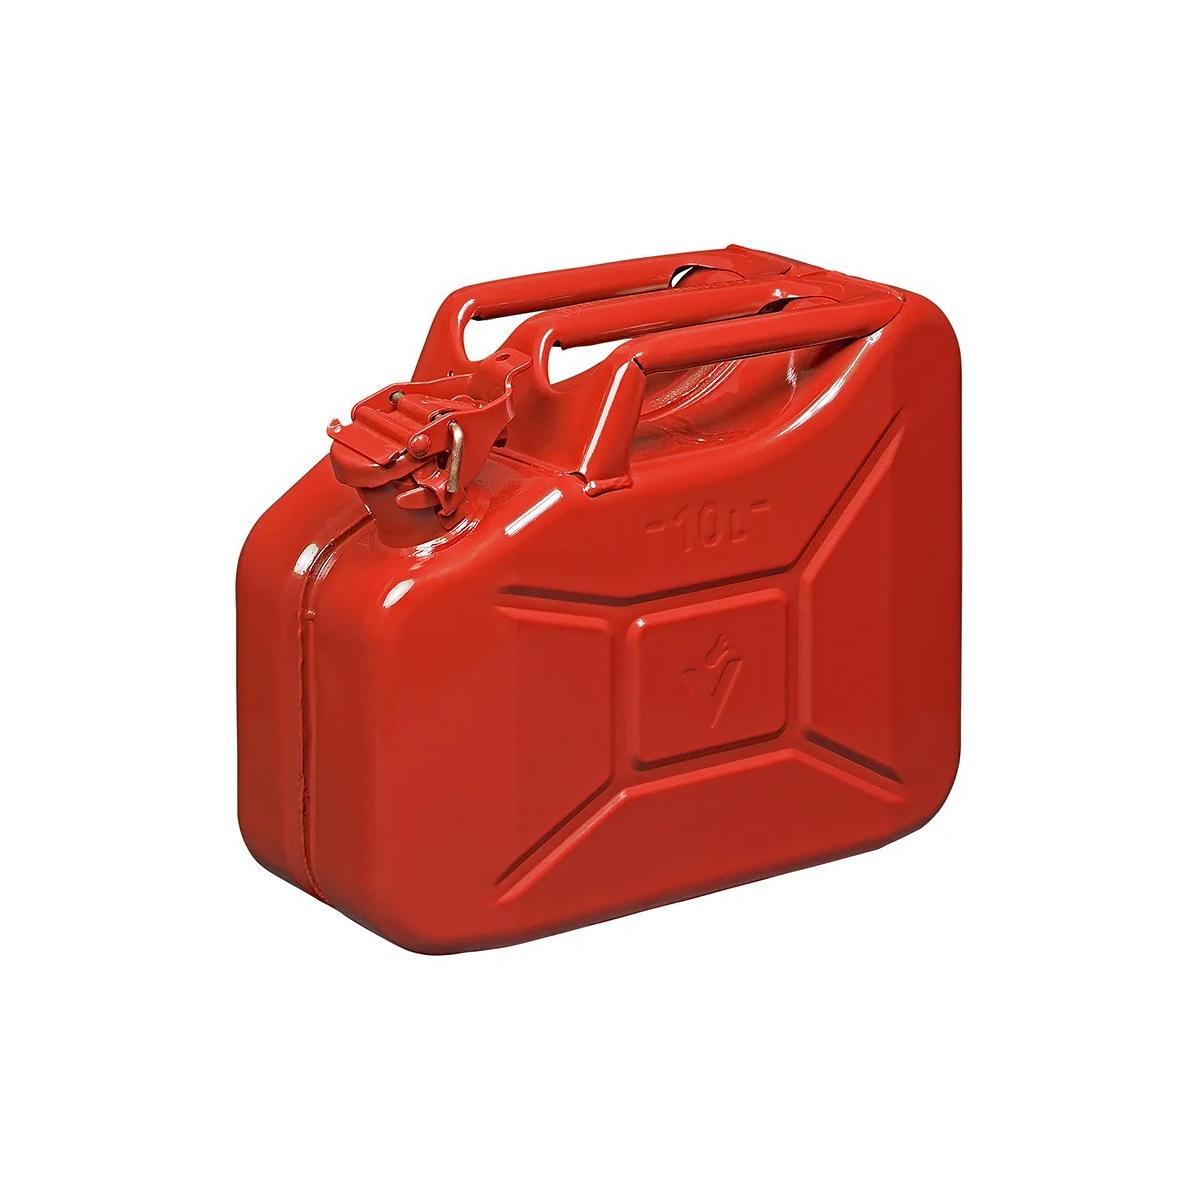 Travellife Luxus Benzinkanister, 20L, rot bei Camping Wagner